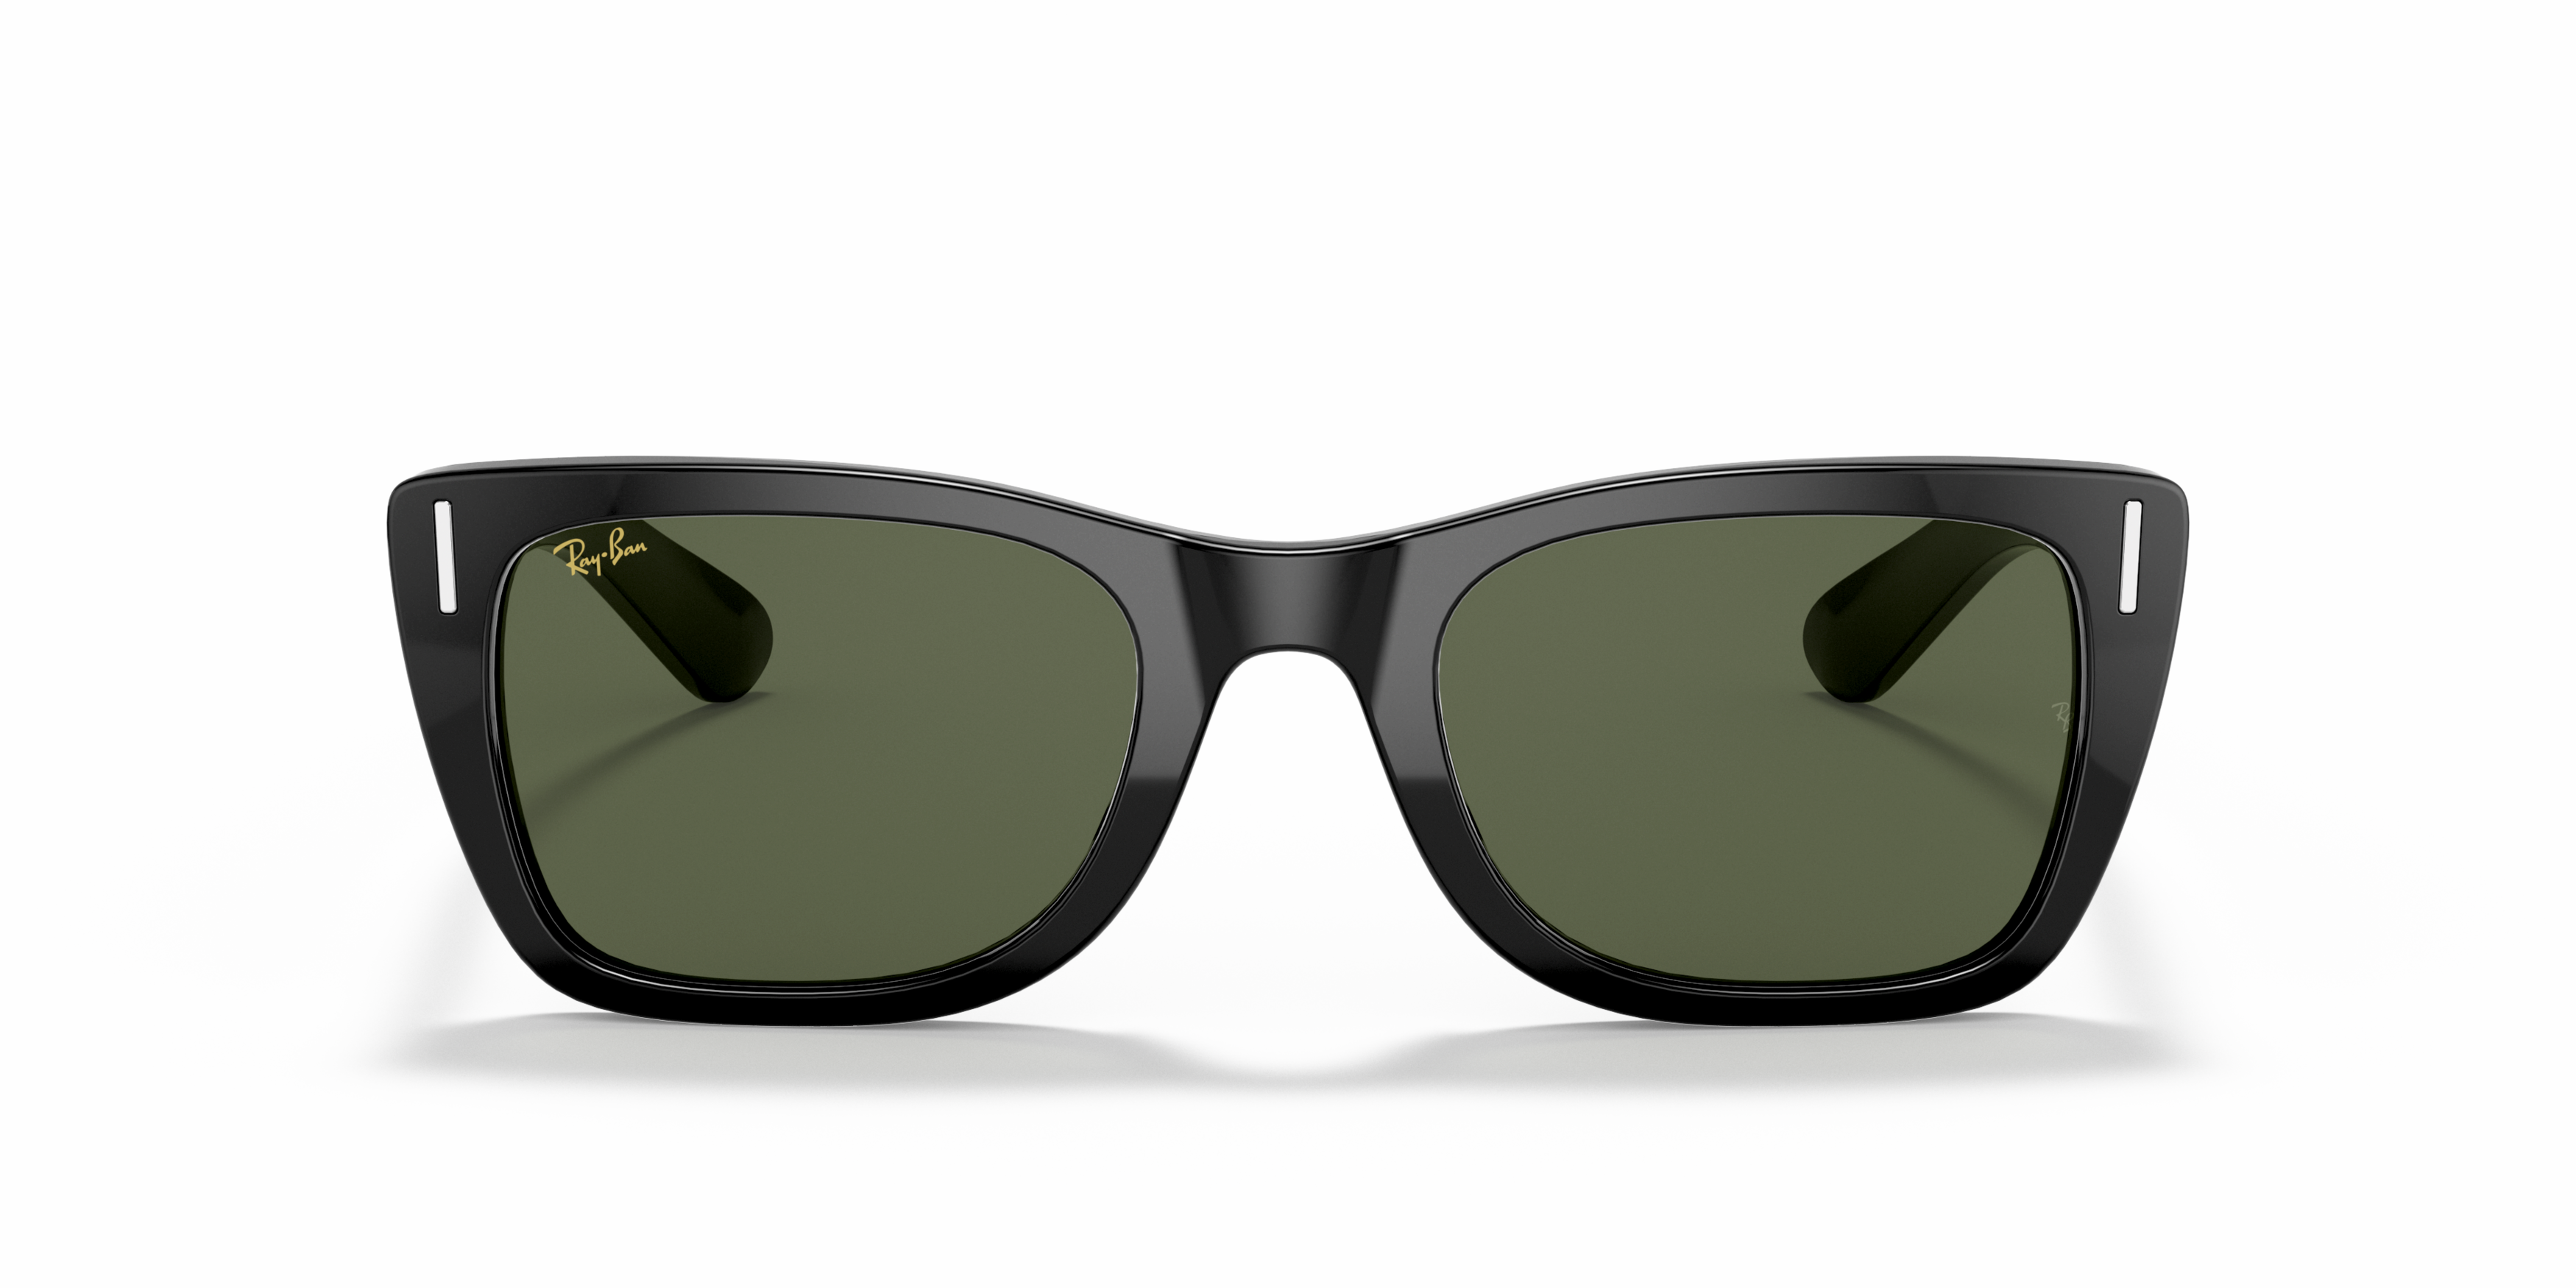 [products.image.front] Ray-Ban 0RB2248 901/31